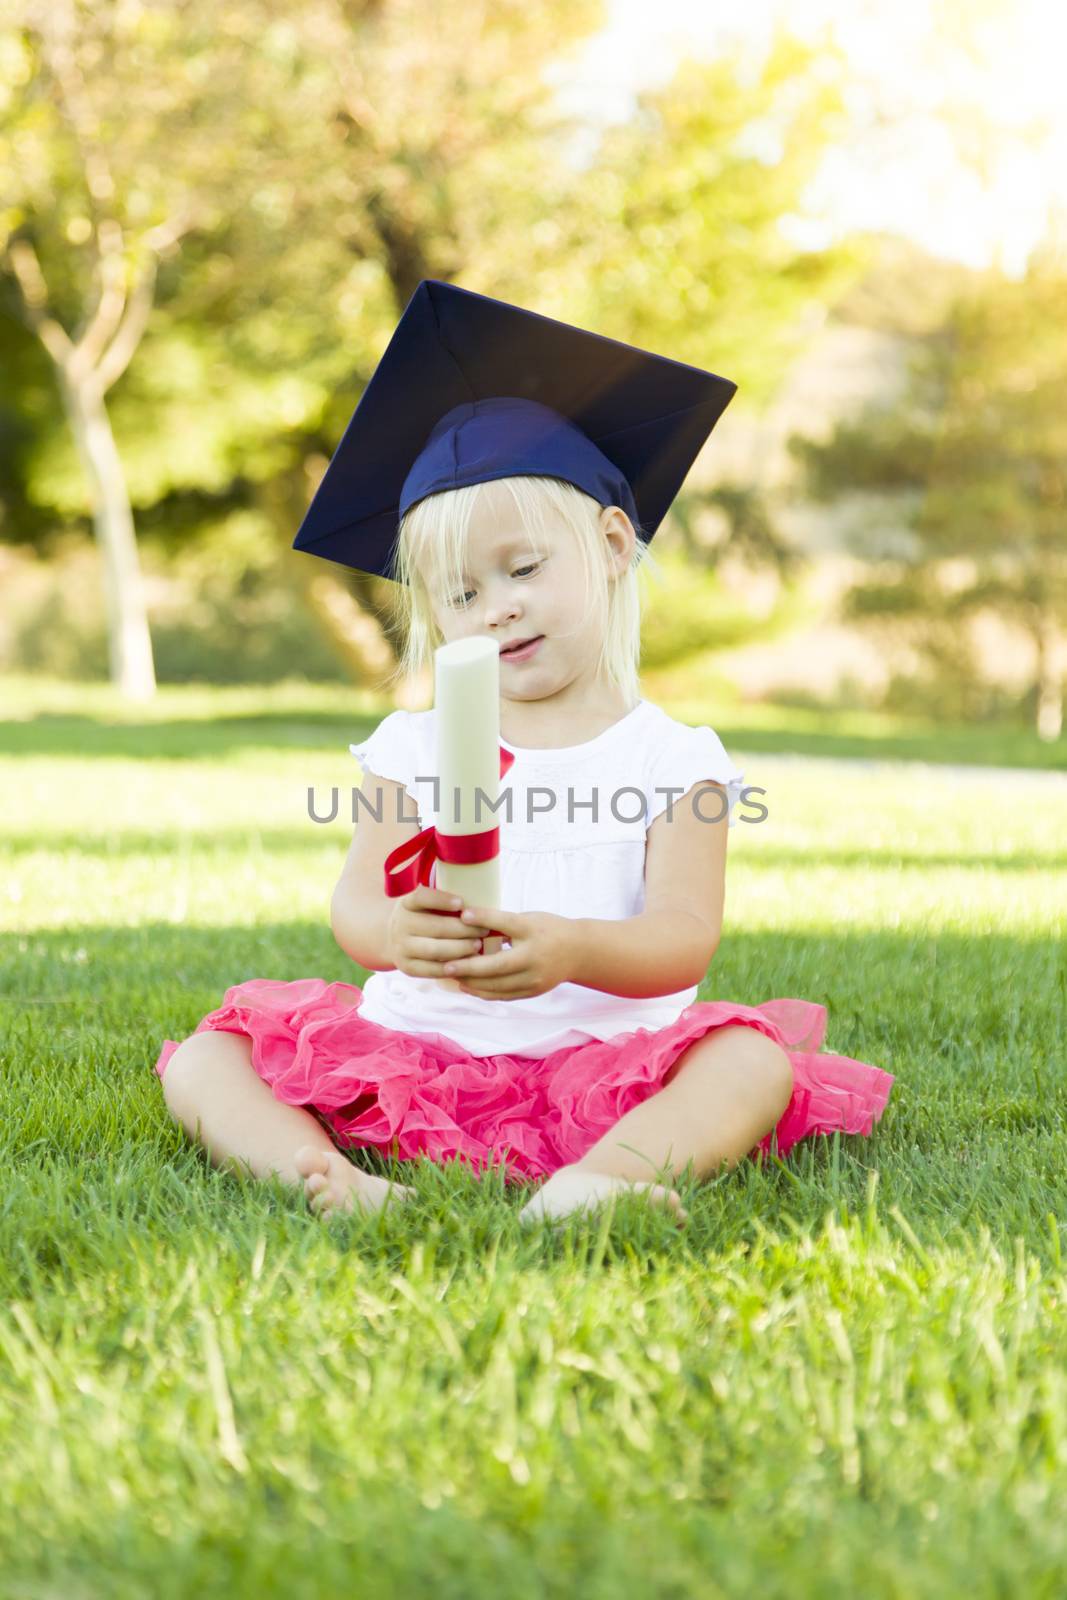 Cute Little Girl In Grass Wearing Graduation Cap Holding Diploma With Ribbon.